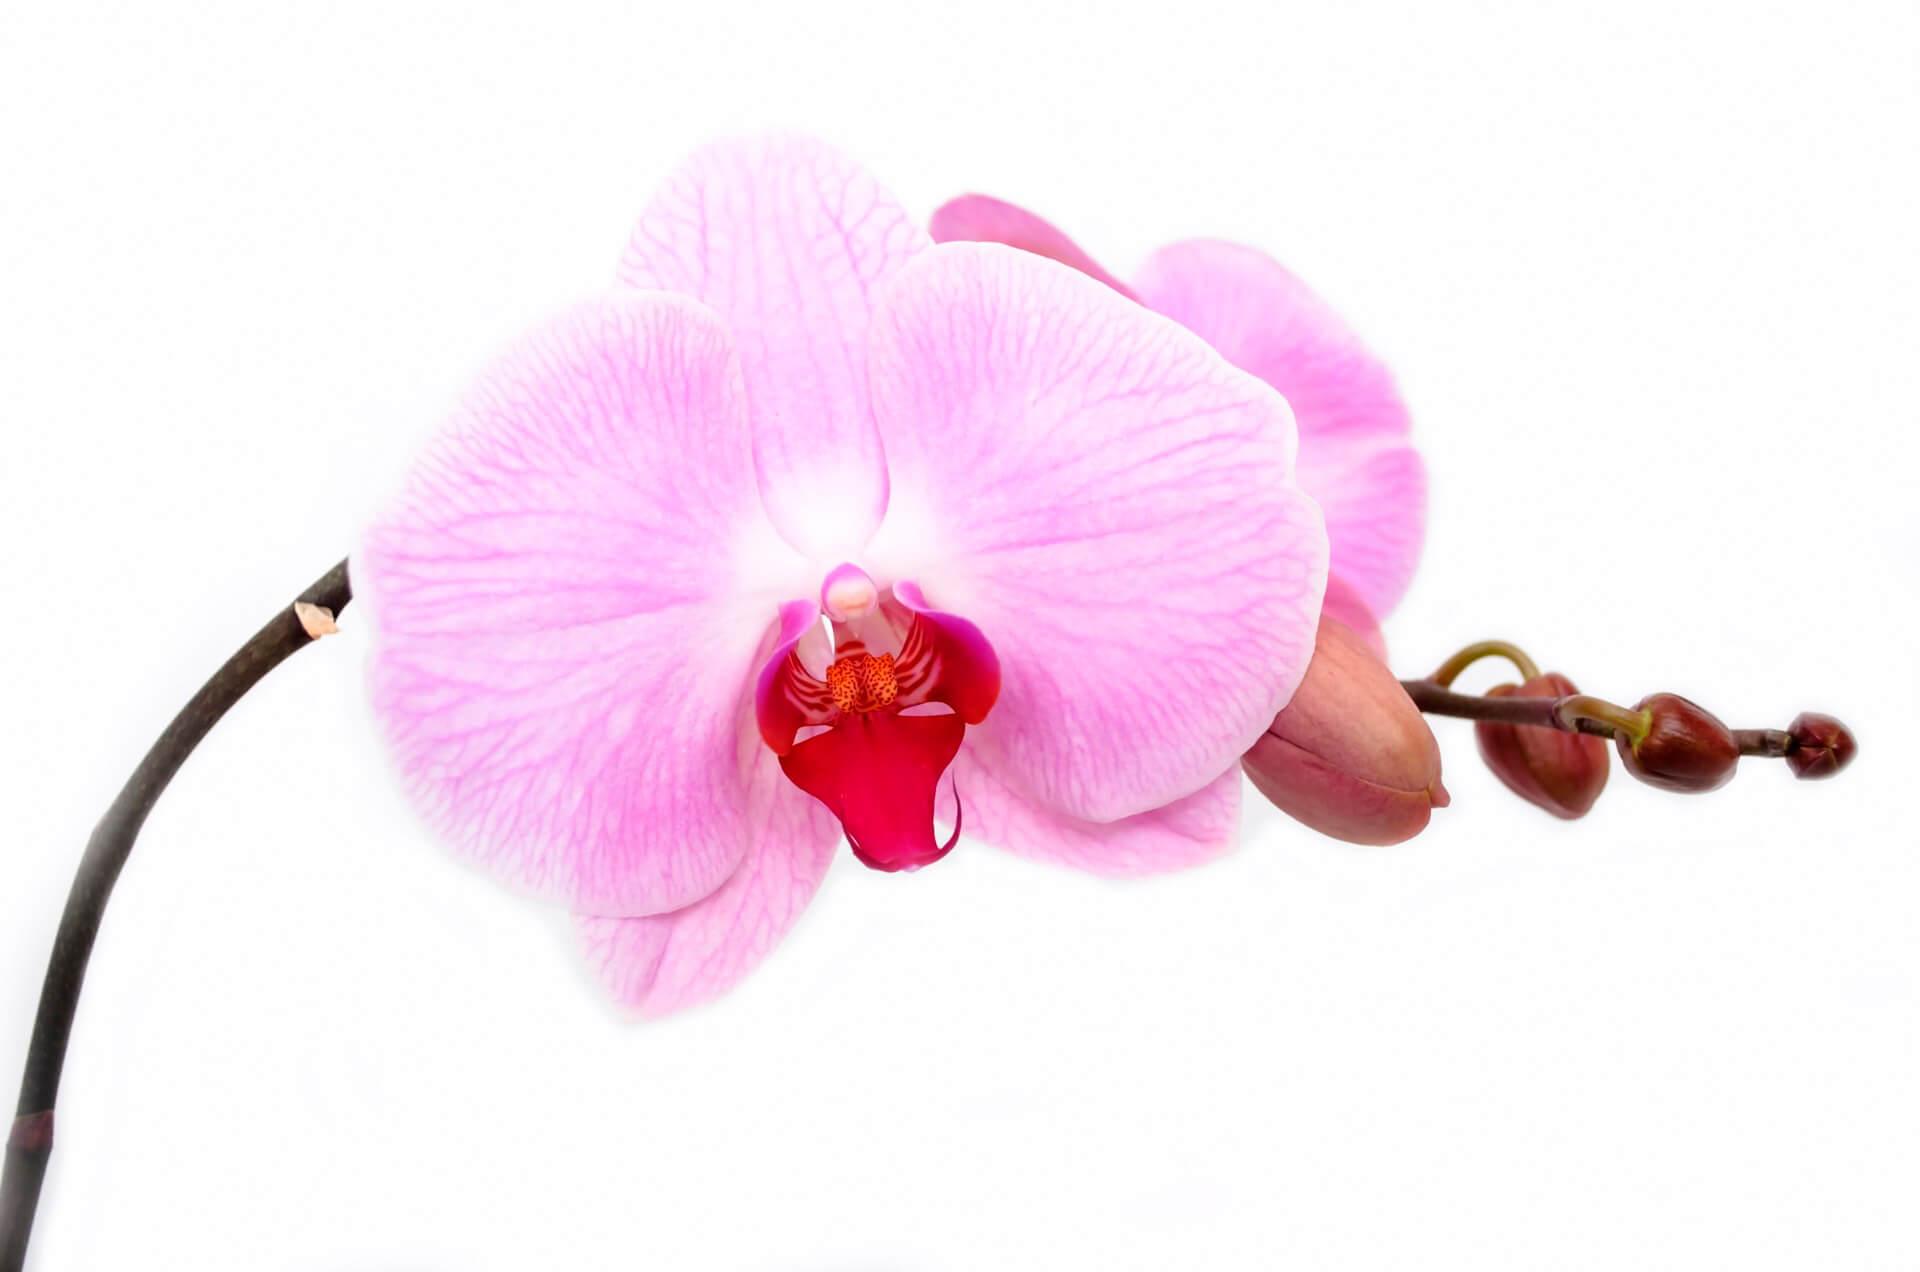 Sprig of pink orchid